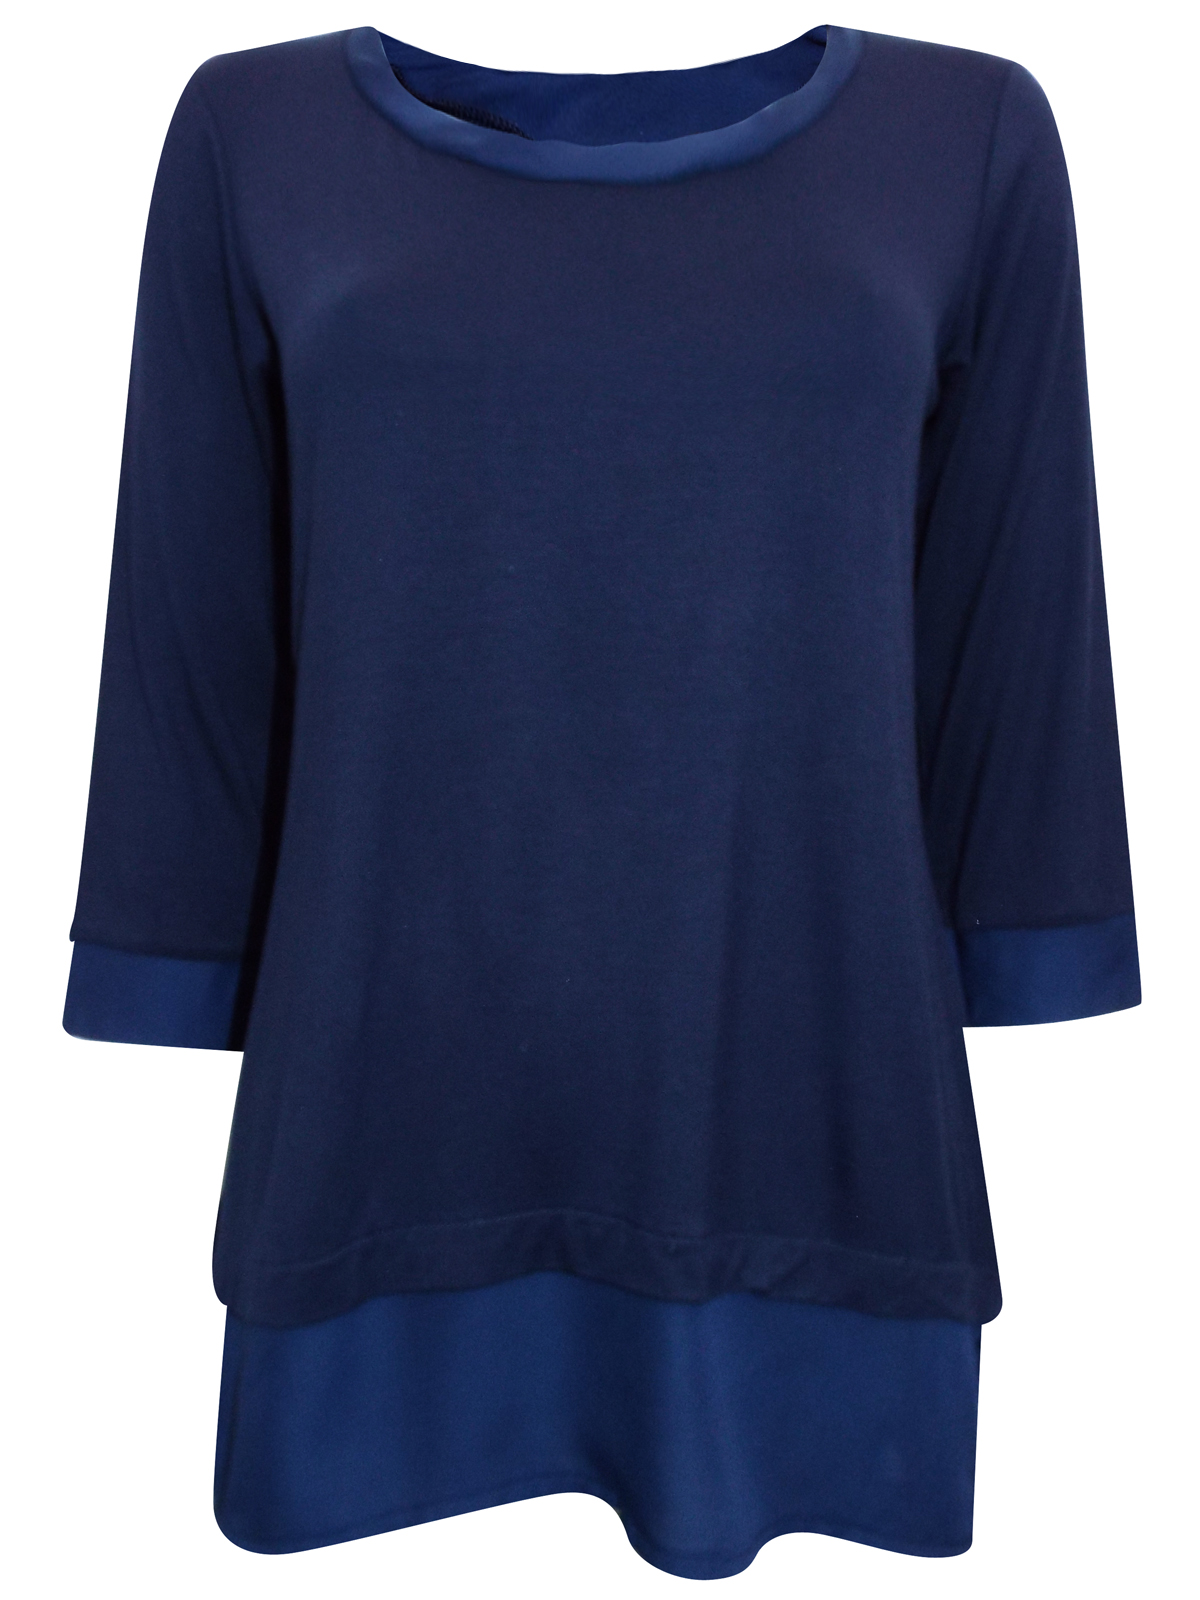 First Avenue NAVY 3/4 Sleeve Chiffon Panel Top - Size 10 to 14